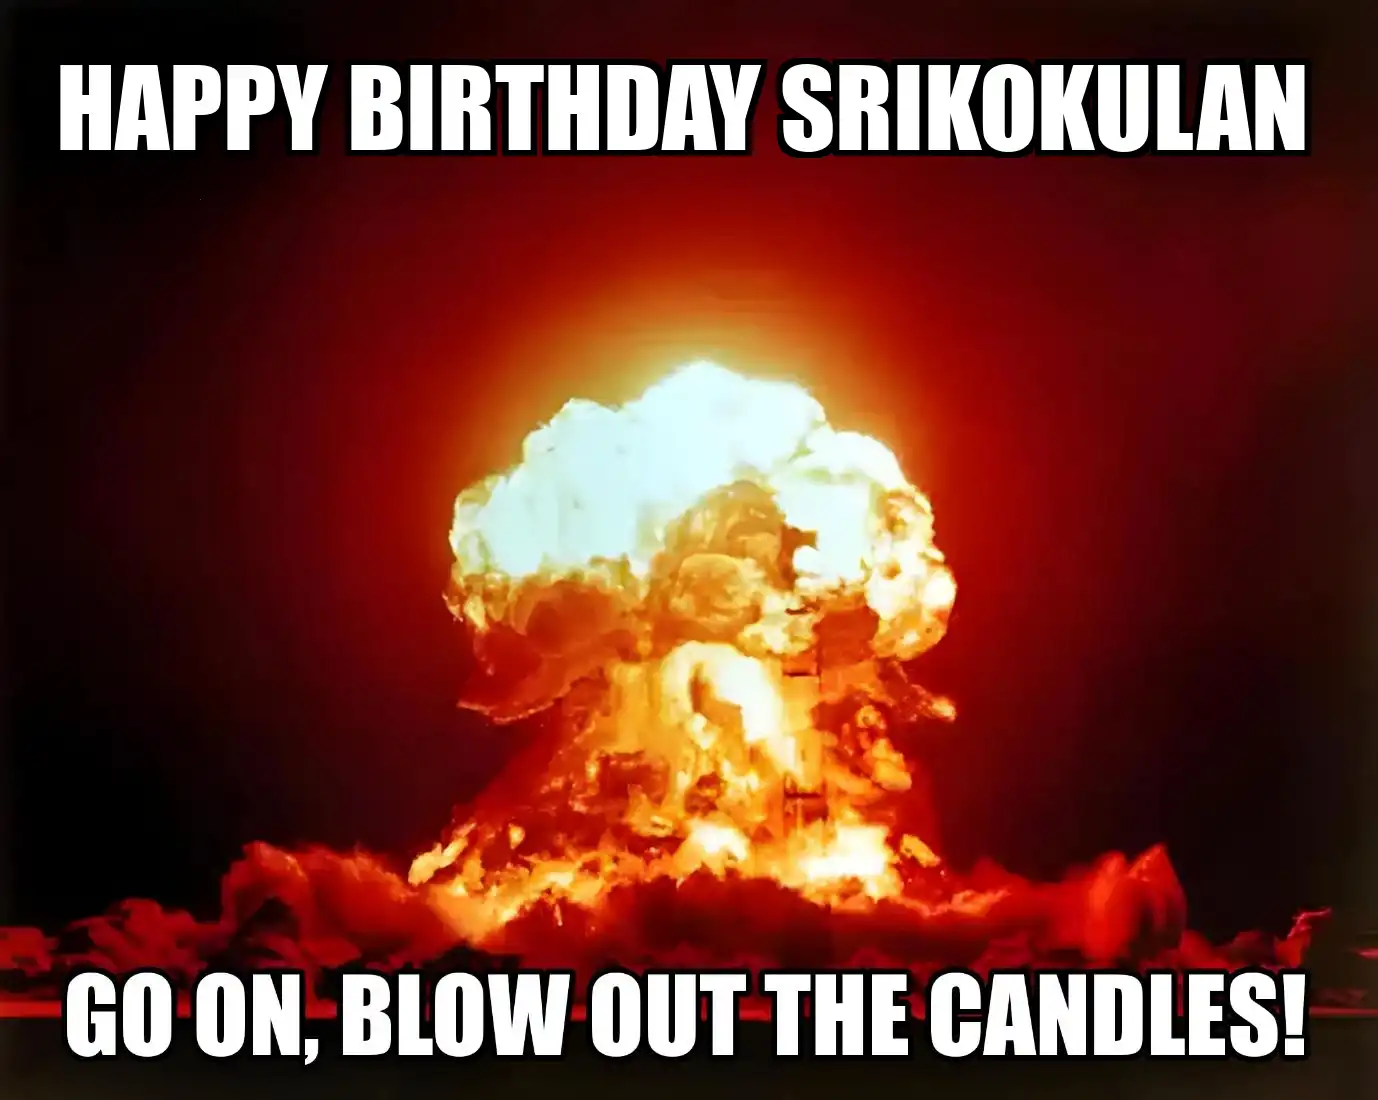 Happy Birthday Srikokulan Go On Blow Out The Candles Meme